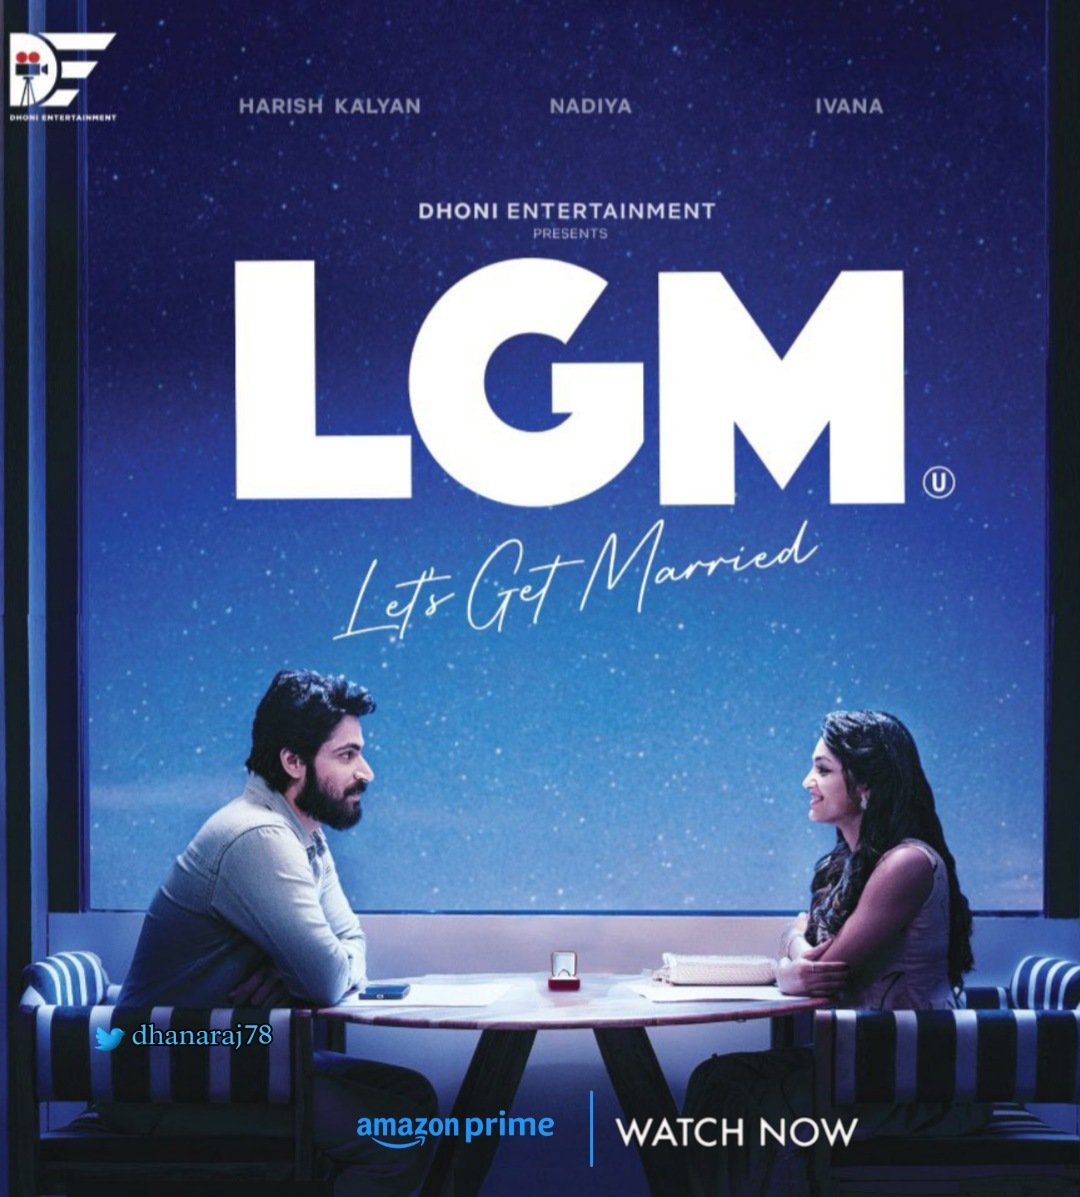 Watching Now📲 #Lets Get Married. (2023))

➖➖➖➖➖➖➖➖➖➖➖
😂COMEDY 👨‍👩‍👧‍👦FAMILY 💏ROMANCE
➖➖➖➖➖➖➖➖➖➖➖
#லெட்ஸ்கெட்மேரேட்
#LGM   
#LetsGetMarried
#LGMOnPrime
#LetsGetMarriedOnPrime
#Amazonprimevideo

#MOVIETIME🍿🍟